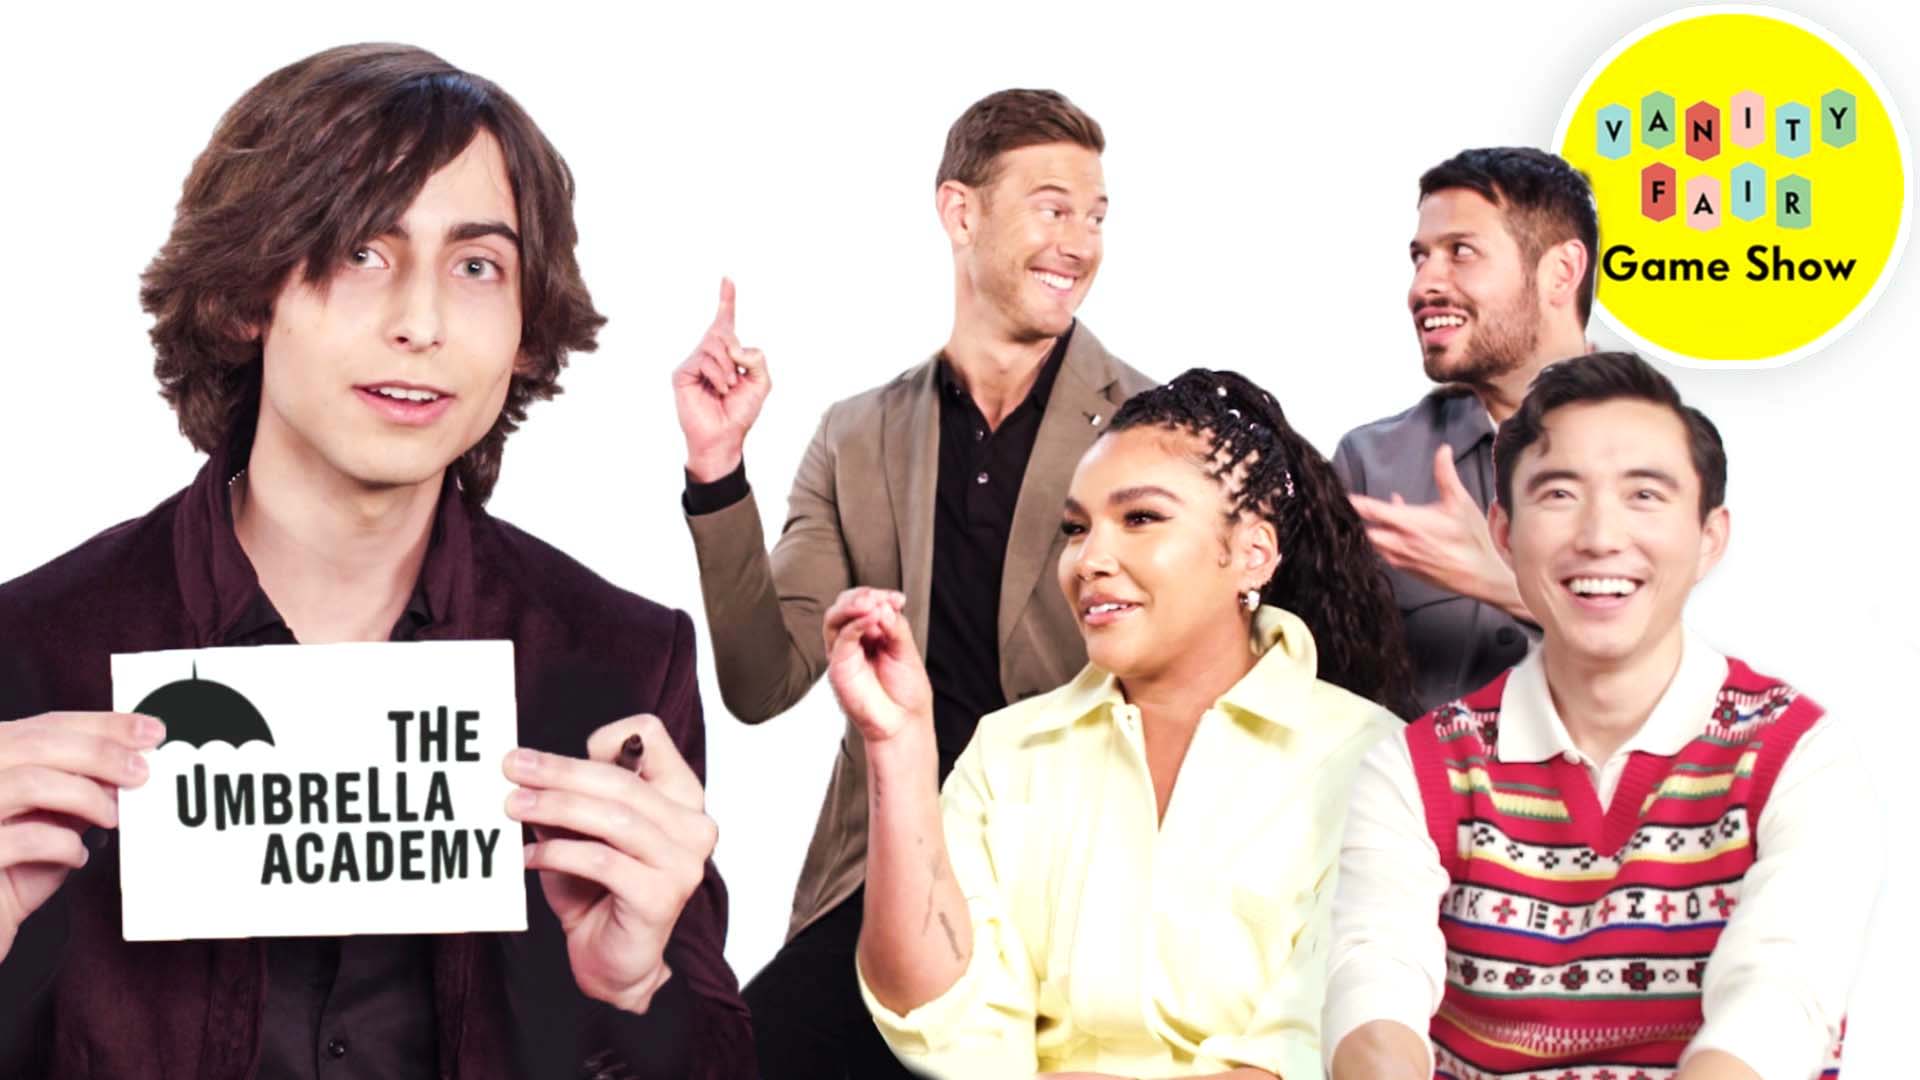 Watch 'The Umbrella Academy' Cast Test How Well They Know Each Other, Quizzing Each Other